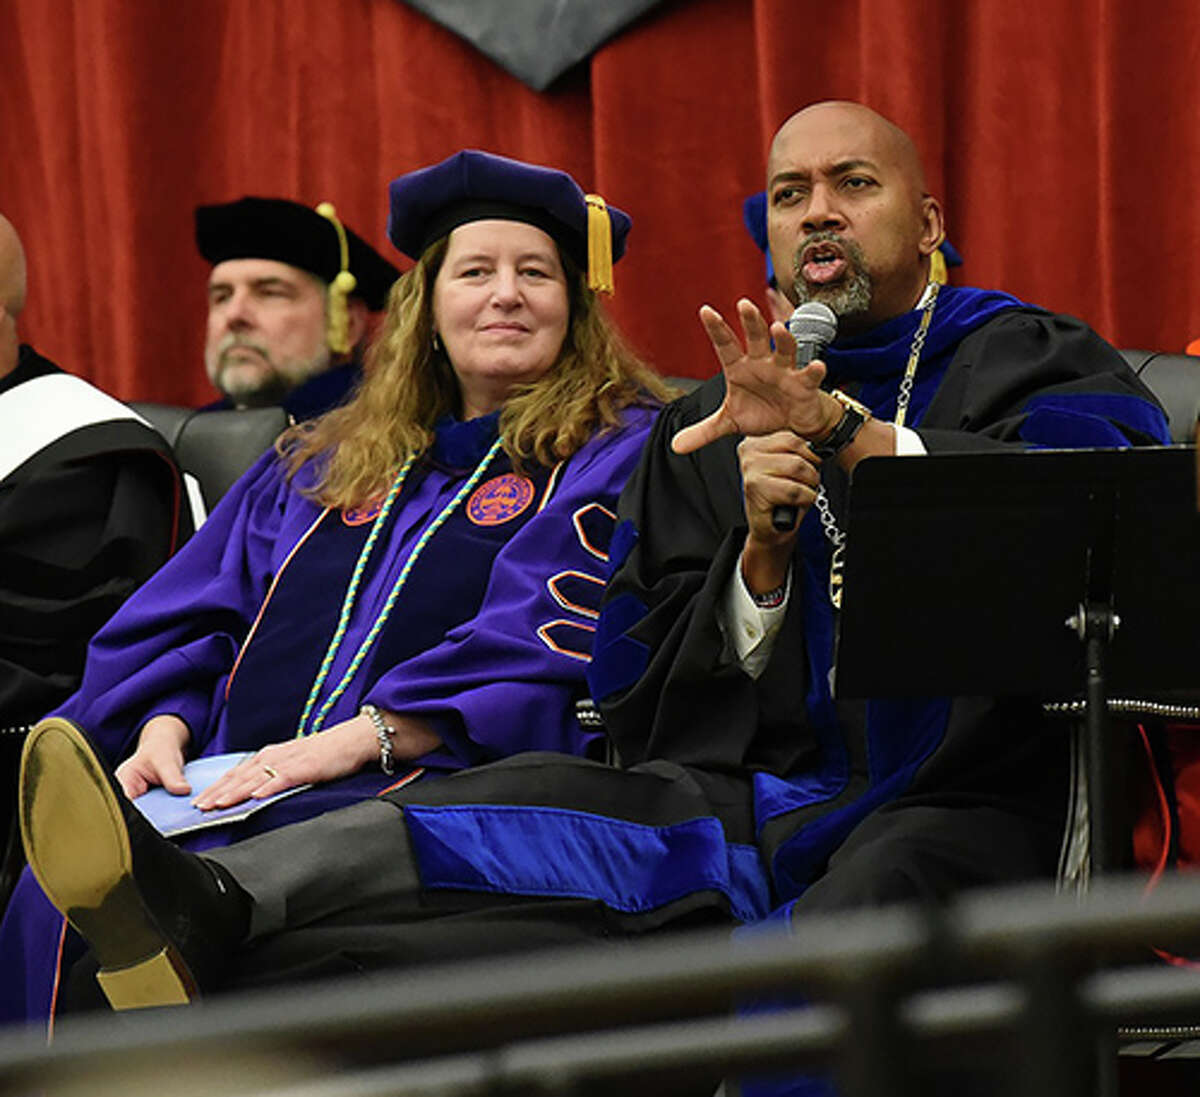 Ferris set to graduate nearly 1,600 at May 56 commencement